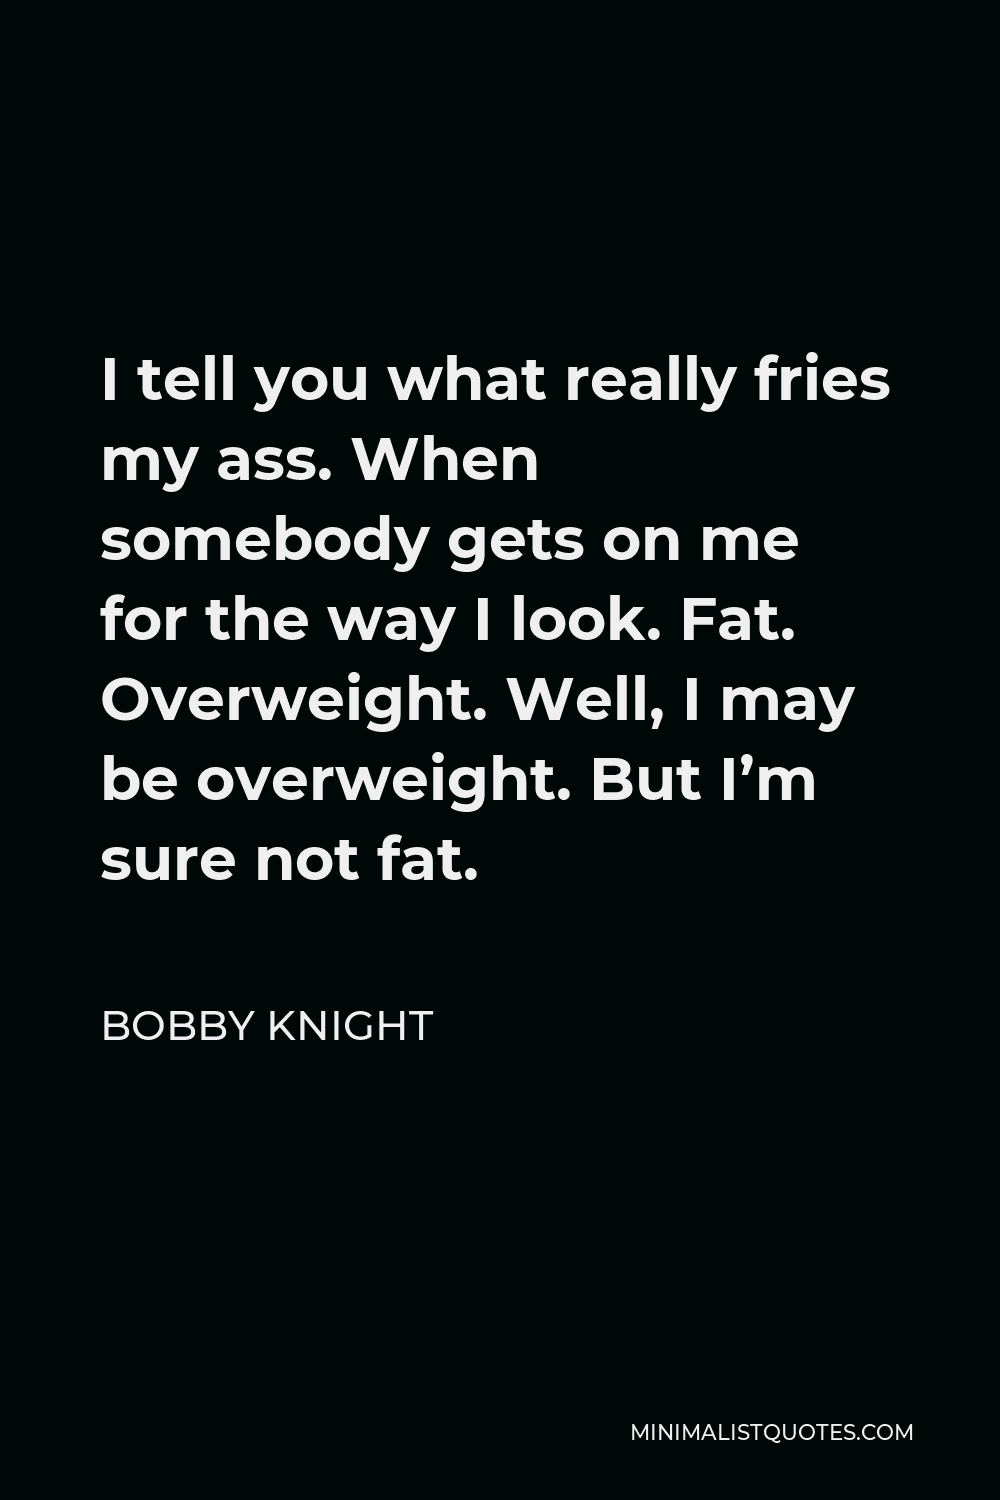 Bobby Knight Quote - I tell you what really fries my ass. When somebody gets on me for the way I look. Fat. Overweight. Well, I may be overweight. But I’m sure not fat.